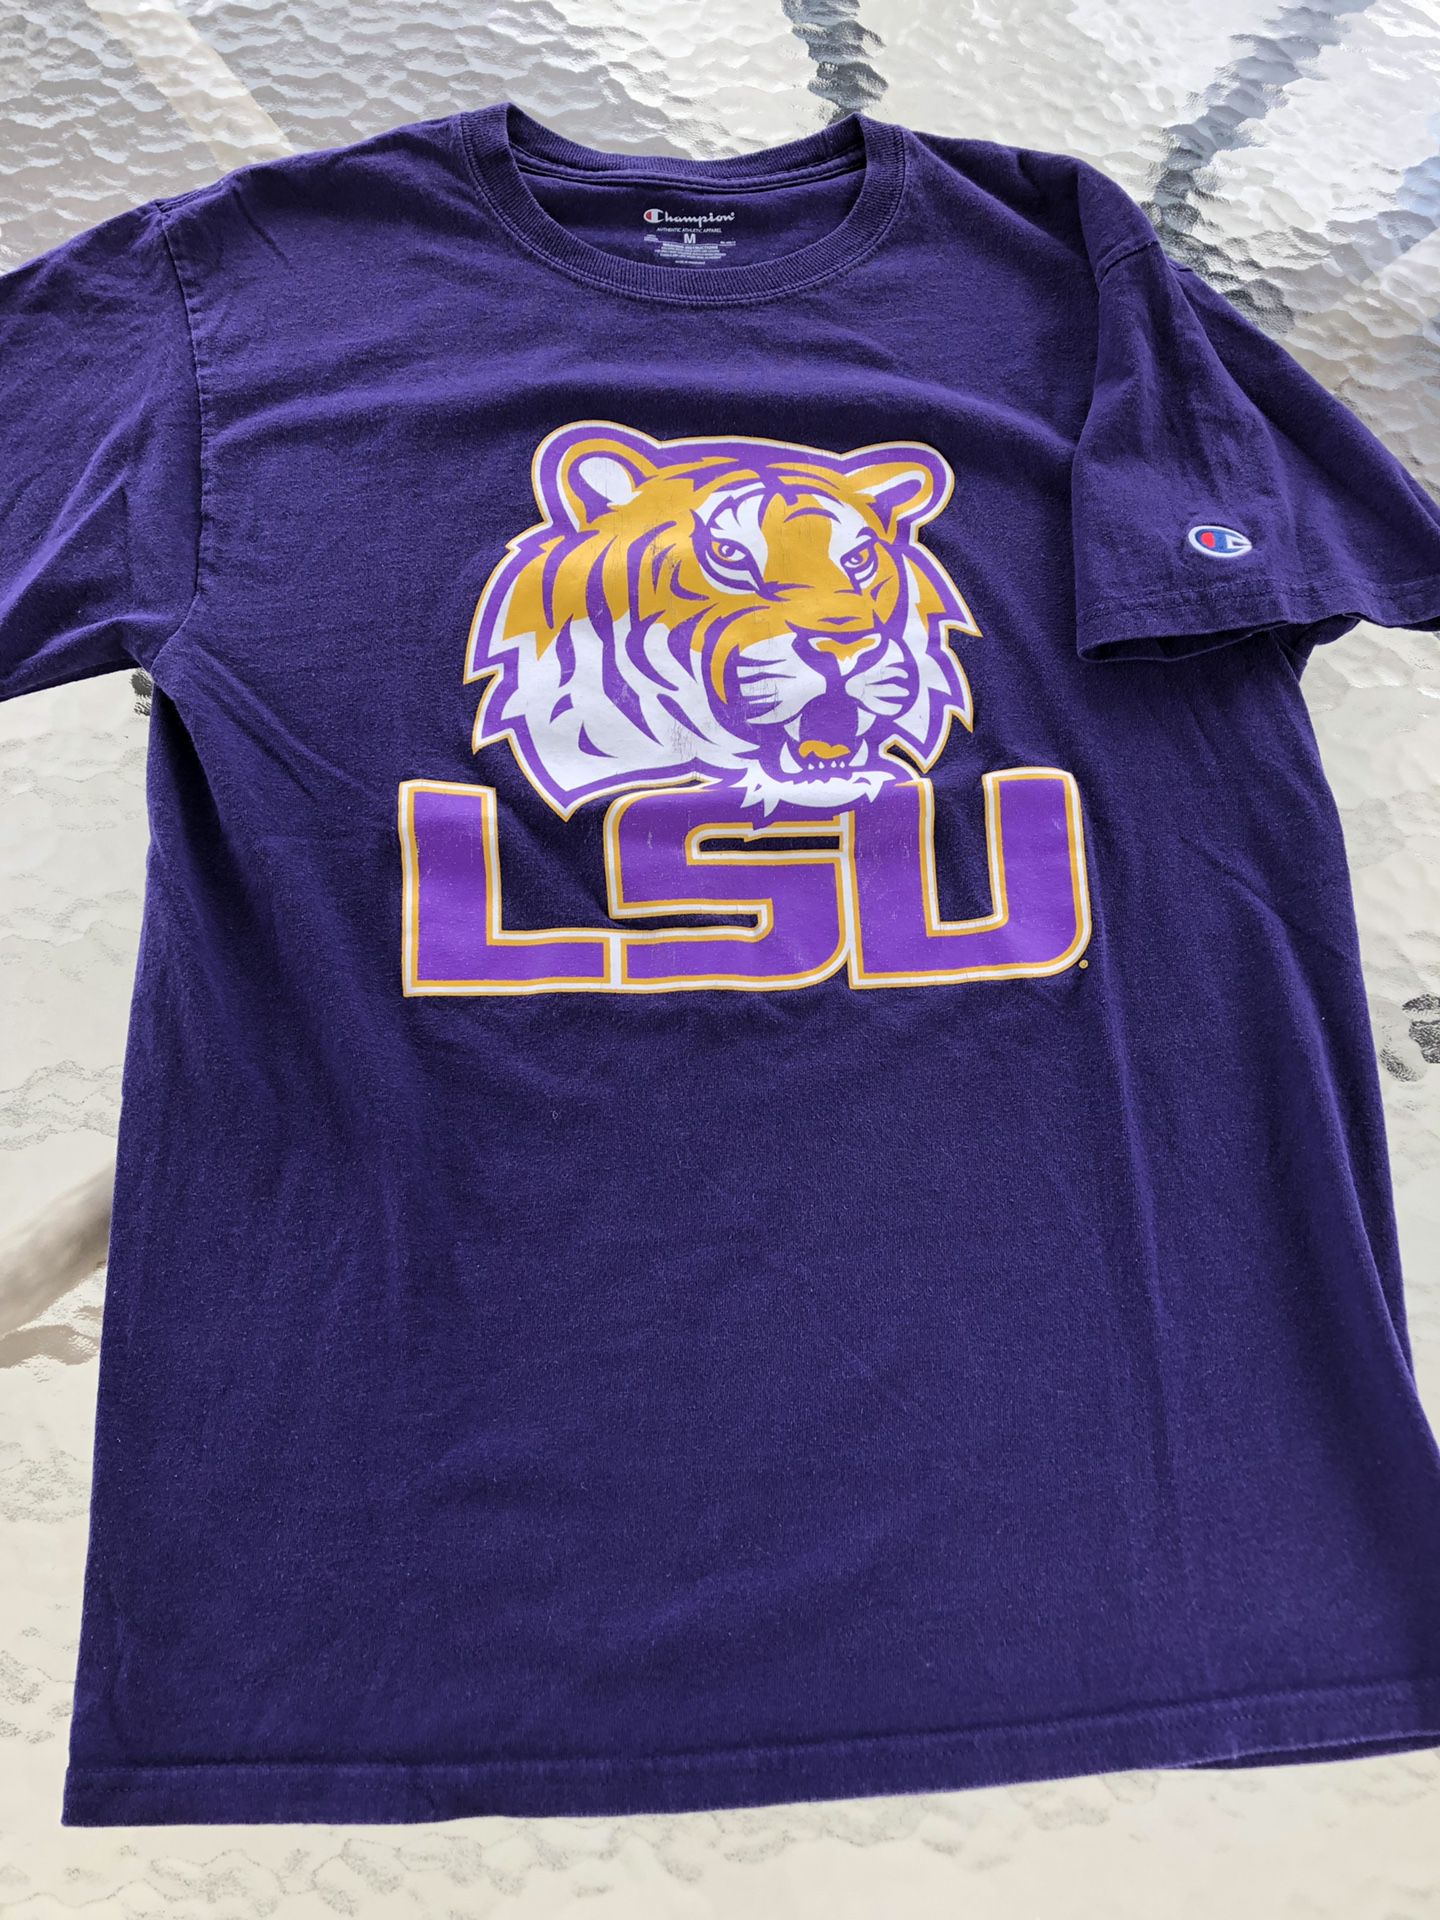 Champion LSU Graphic tee (Medium) for Sale in Seven Valleys, PA - OfferUp